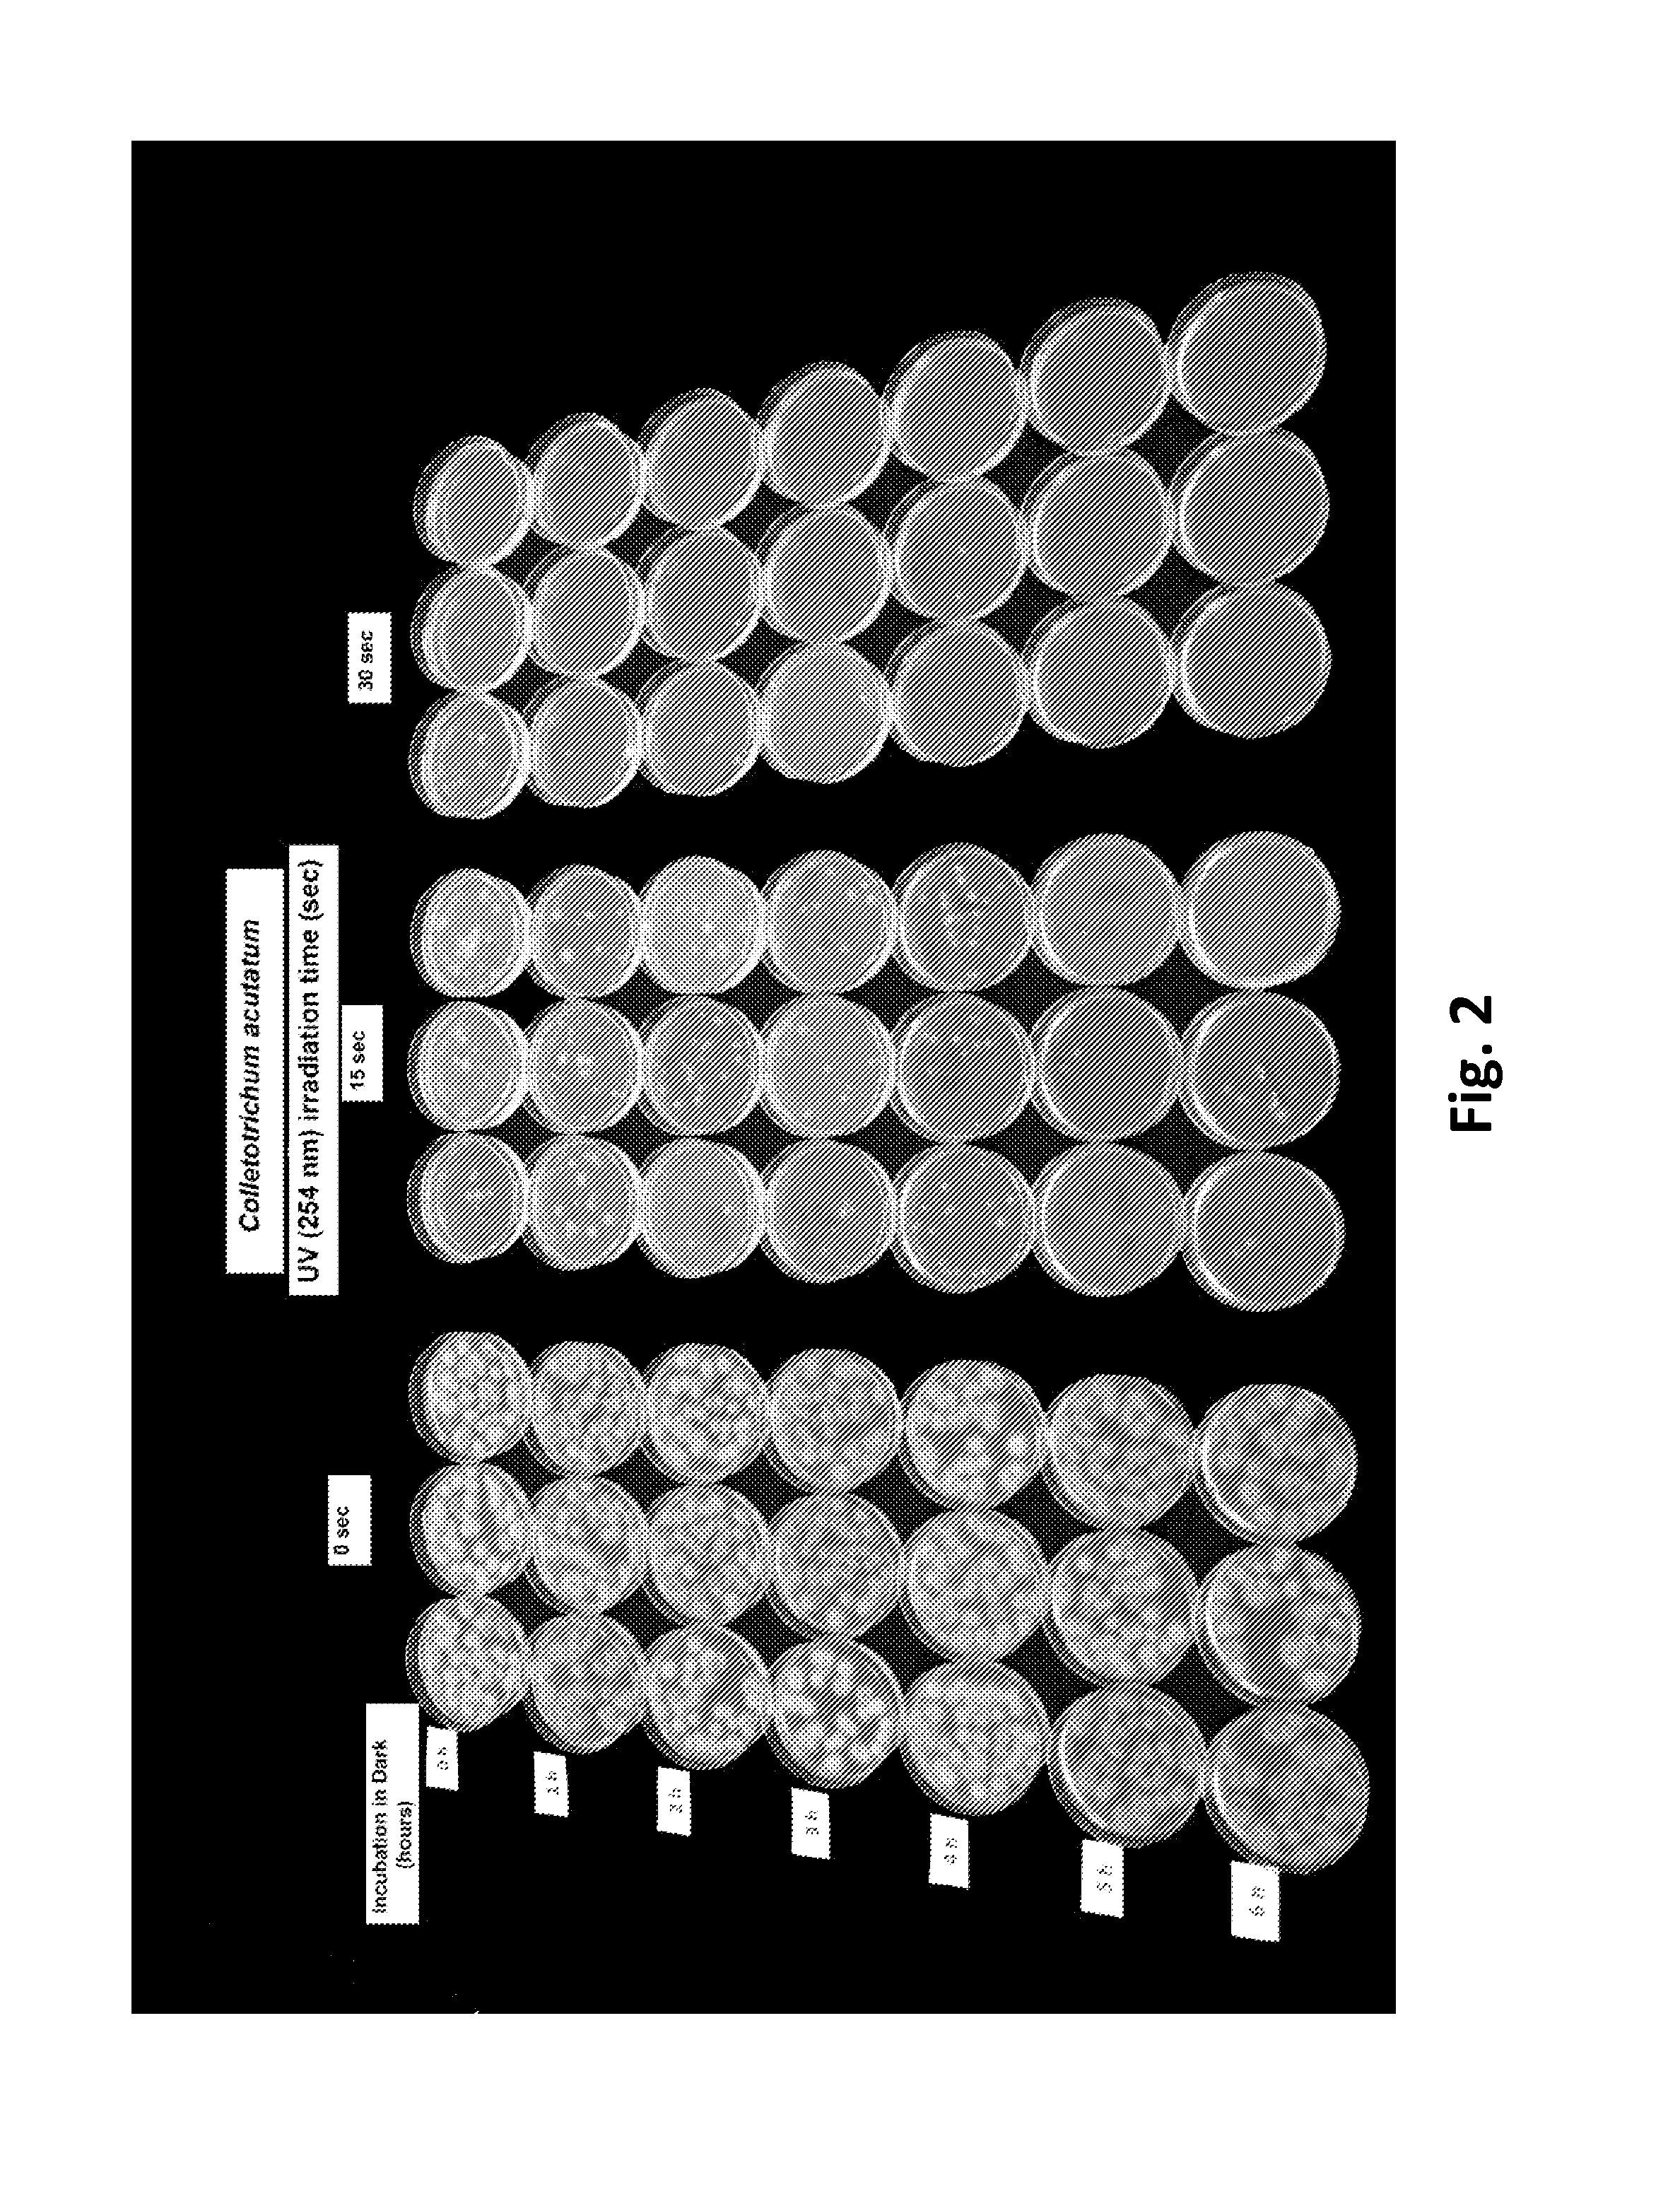 Method for Controlling Fungal Plant Pathogens Using a Combination of UV Radiation Followed by Antagonist Application and Dark Period